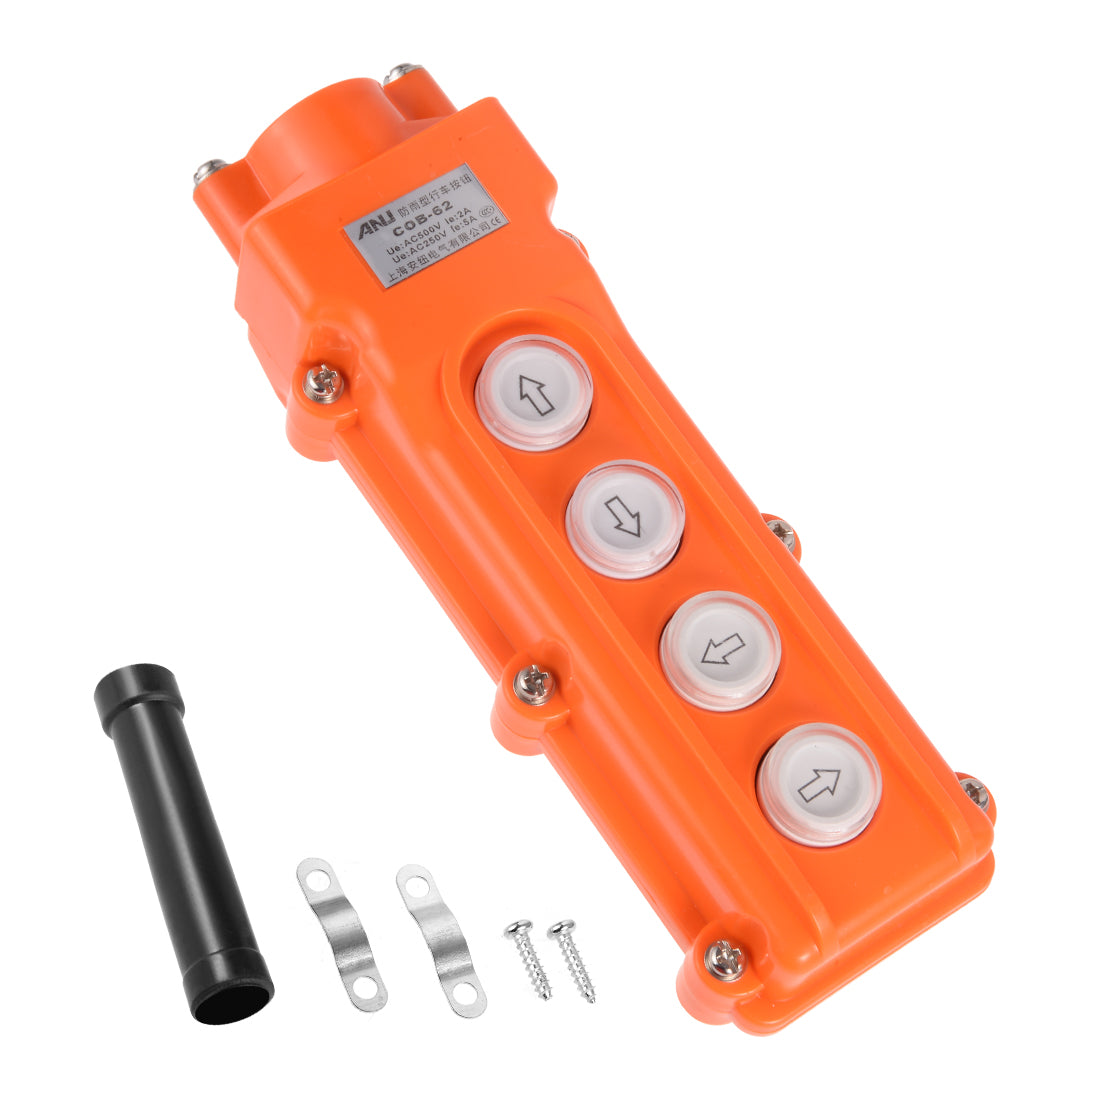 uxcell Uxcell Hoist Crane Pendant Control Station Push Button Switch Up Down Left Right 4 Ways Orange